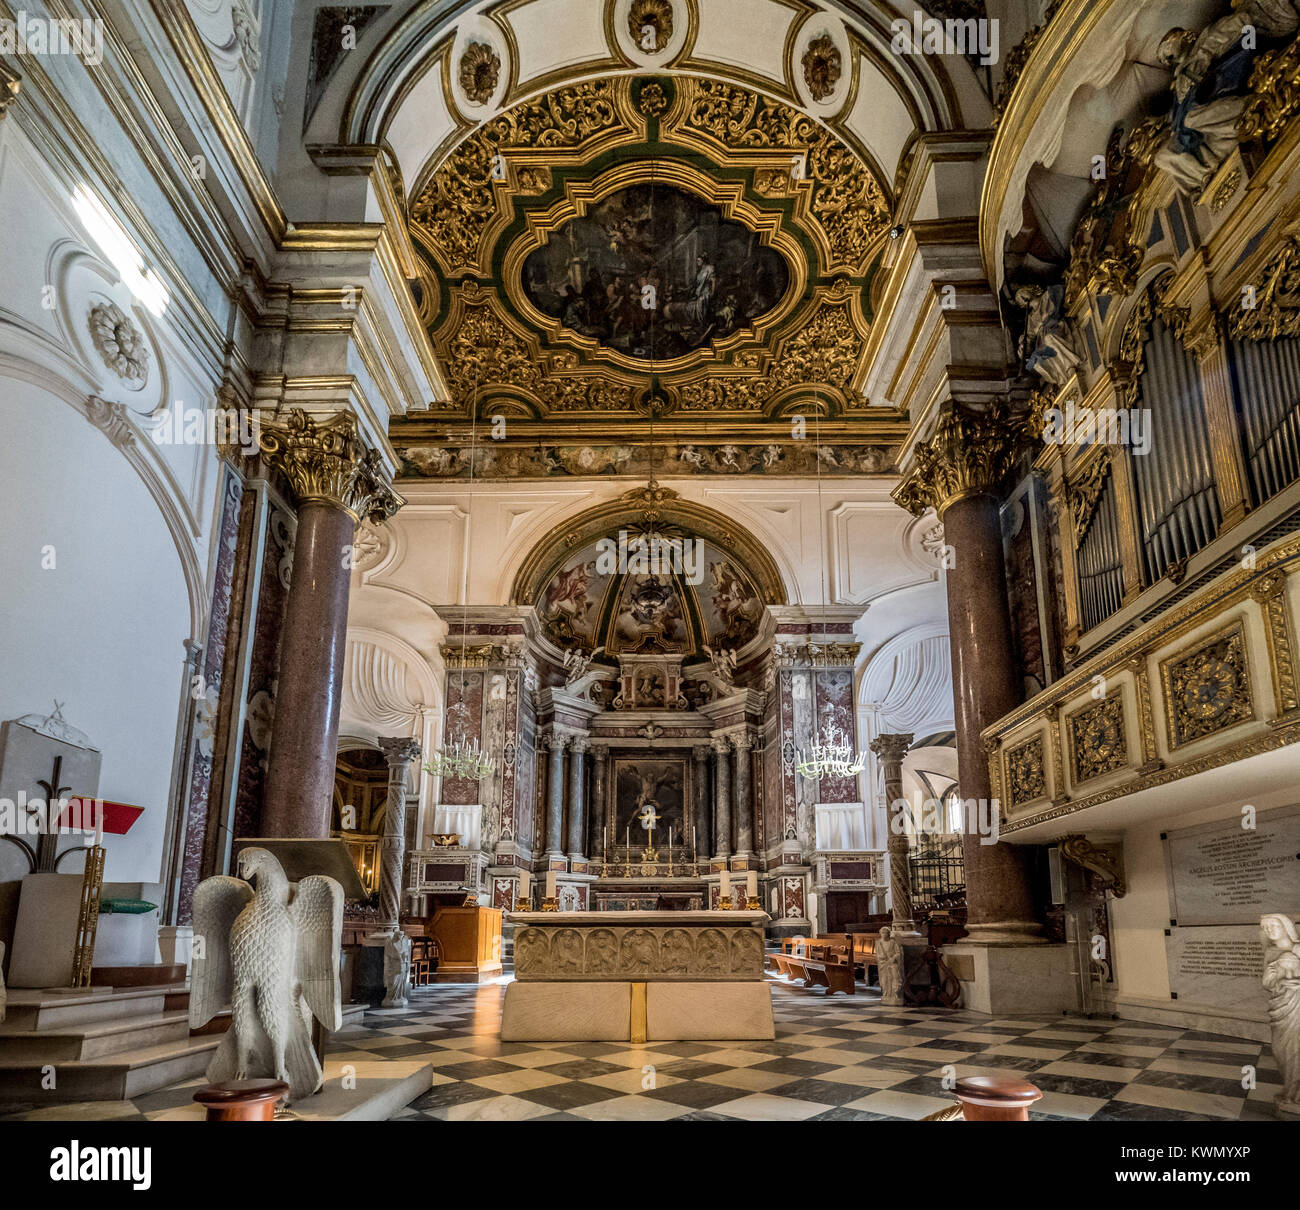 Interior of Amalfi Cathedral. The Cathedral at The Monumental complex of St Andrew in Amalfi, Italy. Stock Photo